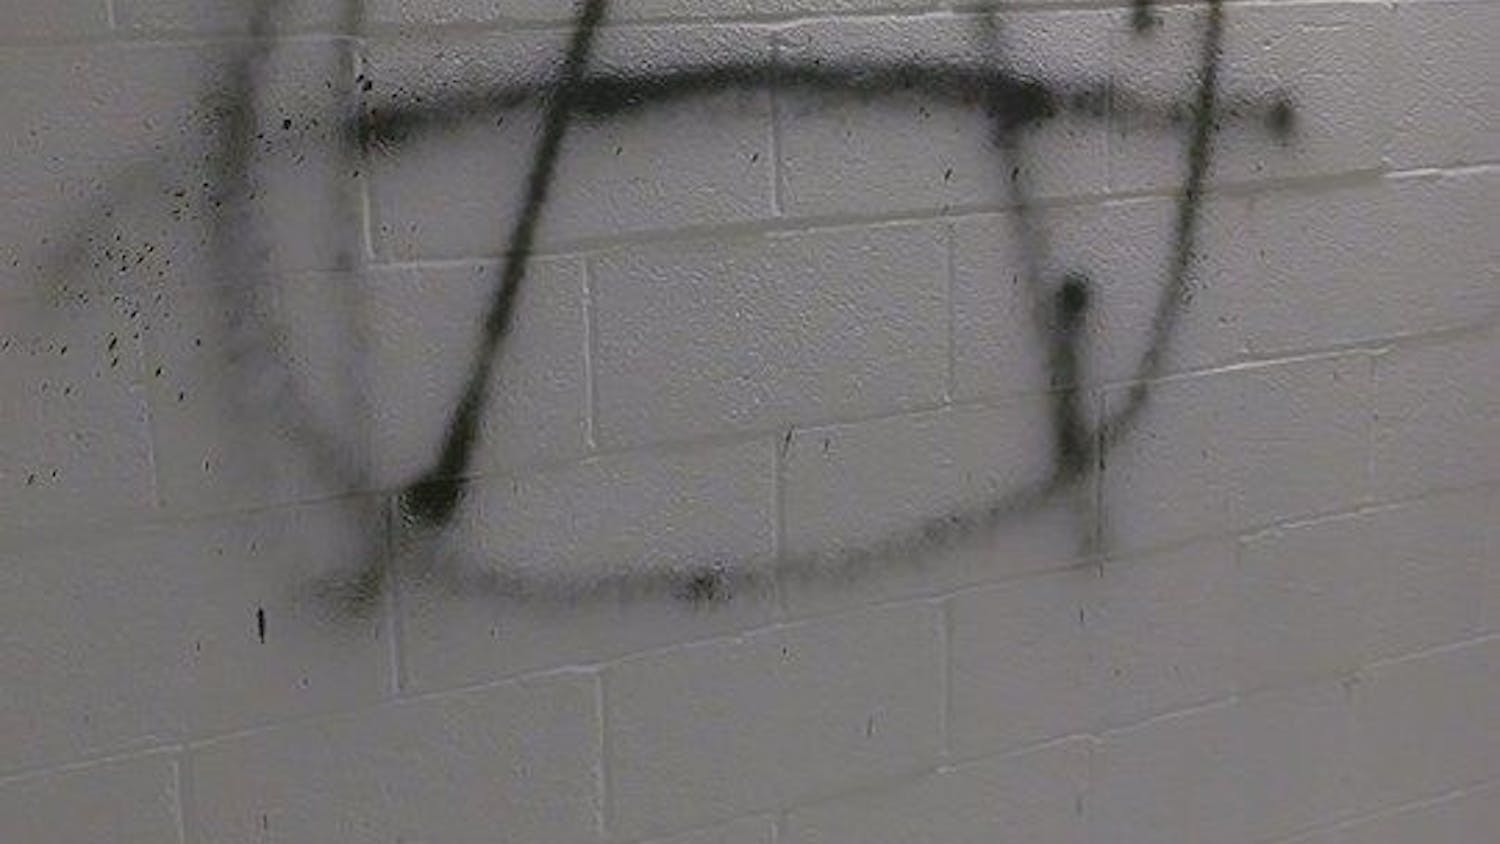 	An anarchist symbol was found painted on a wall in the Ward Circle Building at 7 p.m. on Jan. 14.